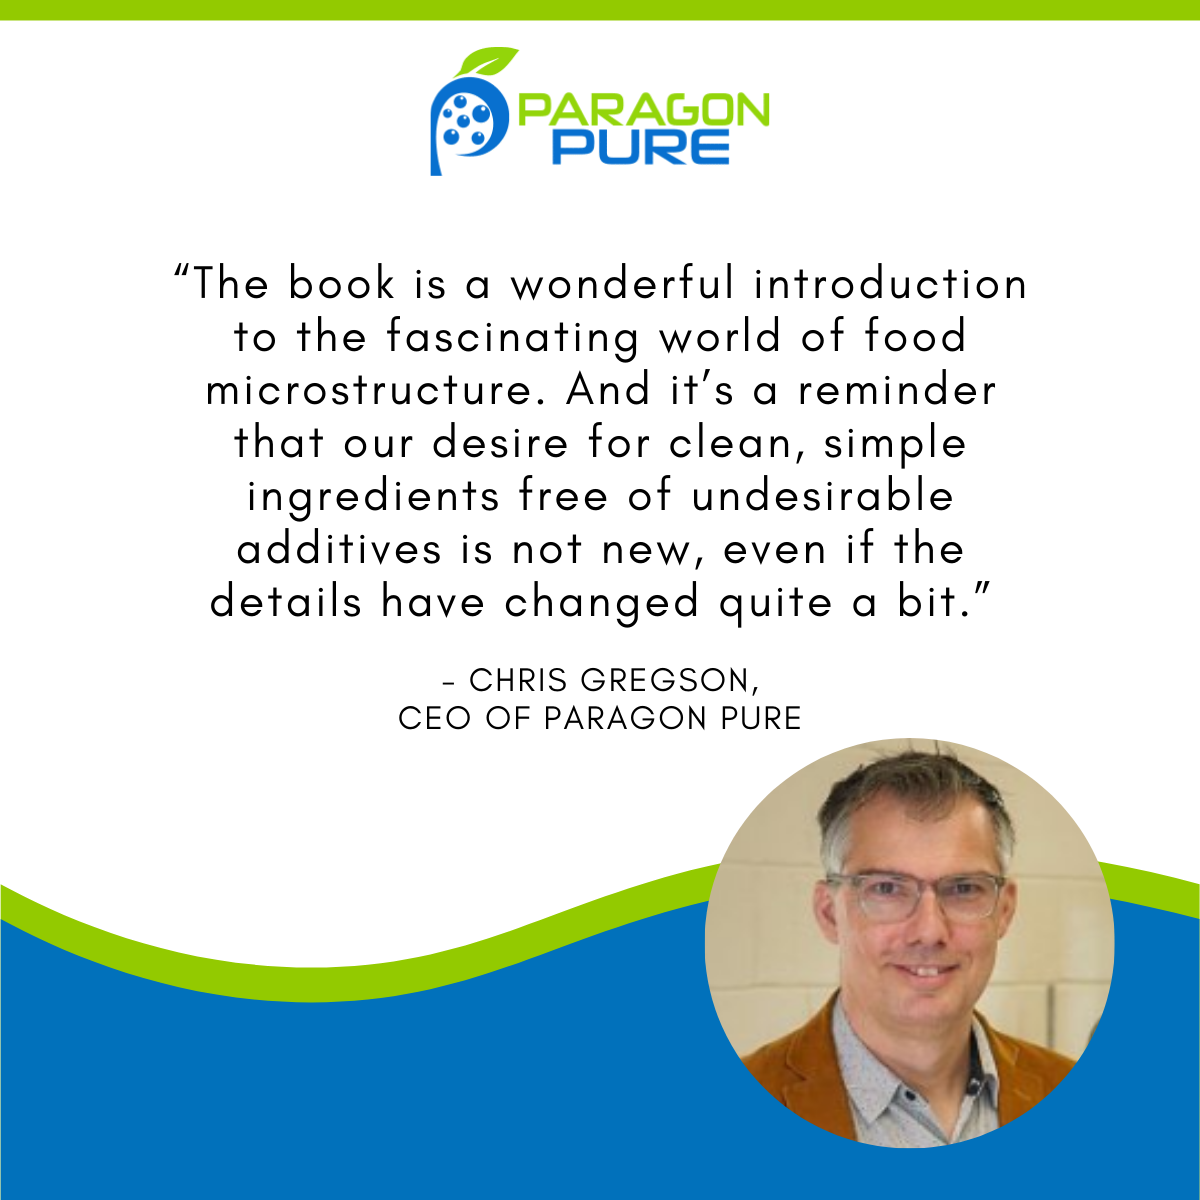 Chris Gregson, CEO of Paragon Pure